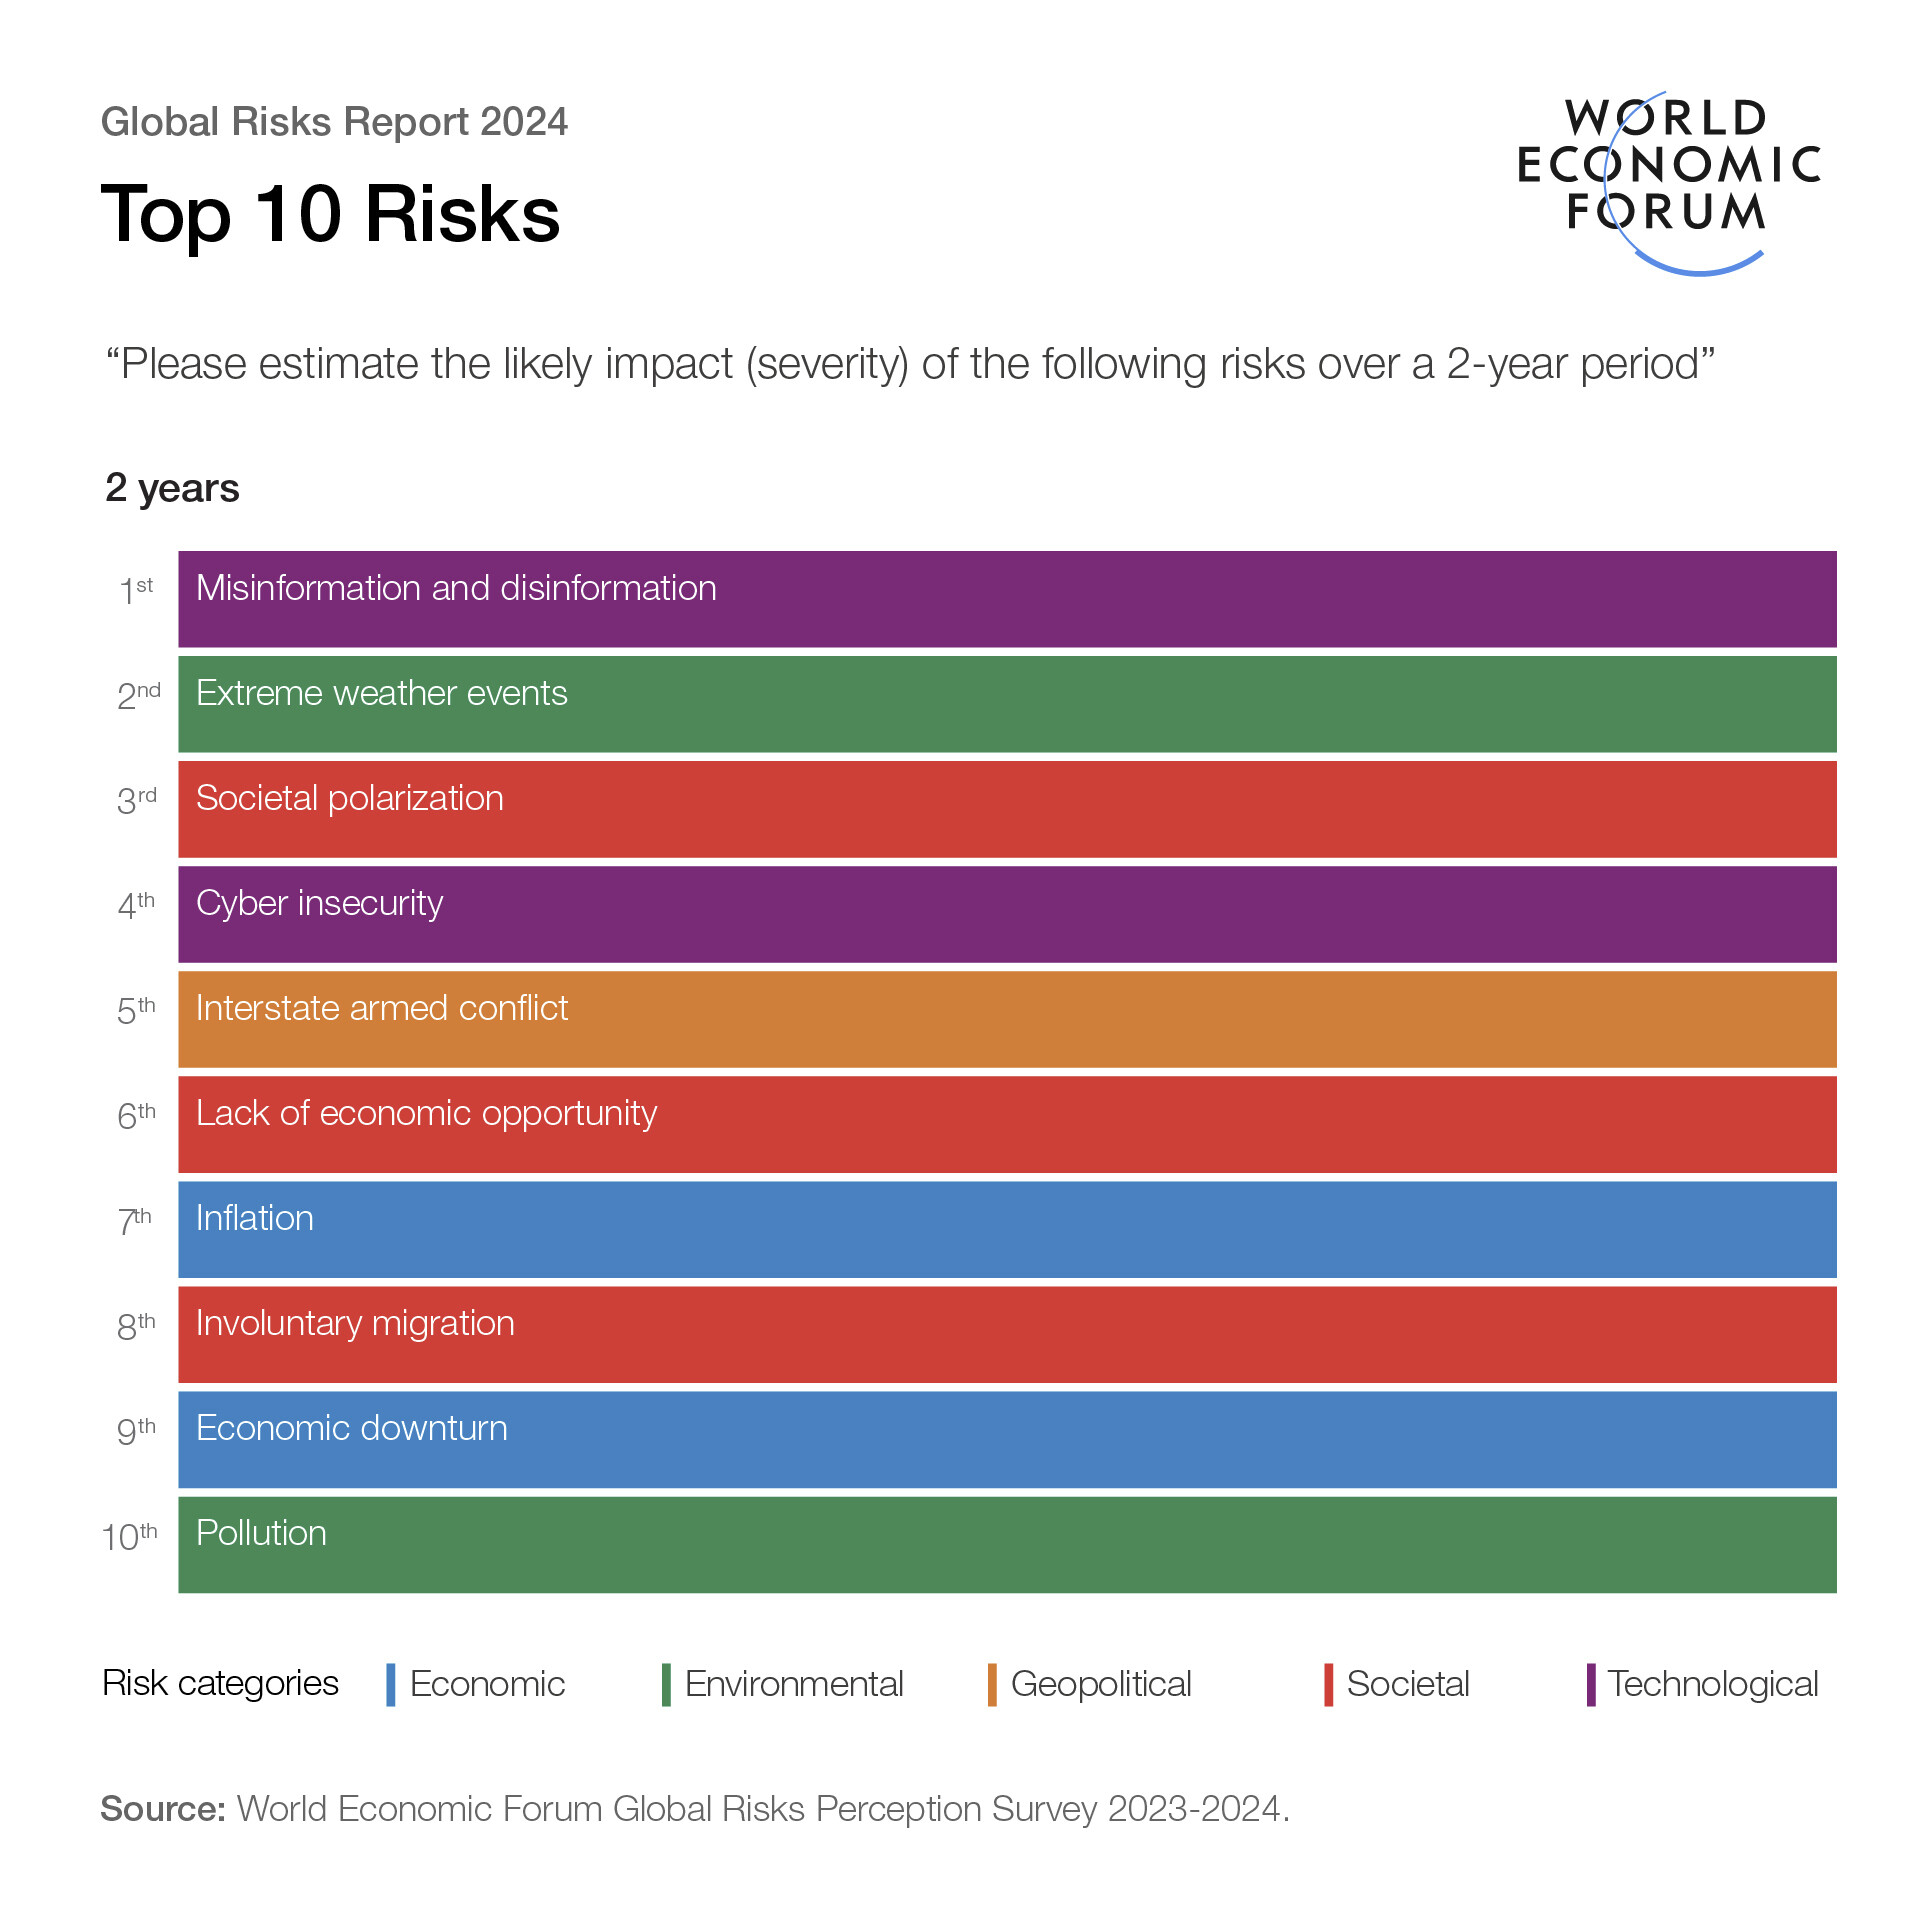 Top 10 global risks over a 2-year period.